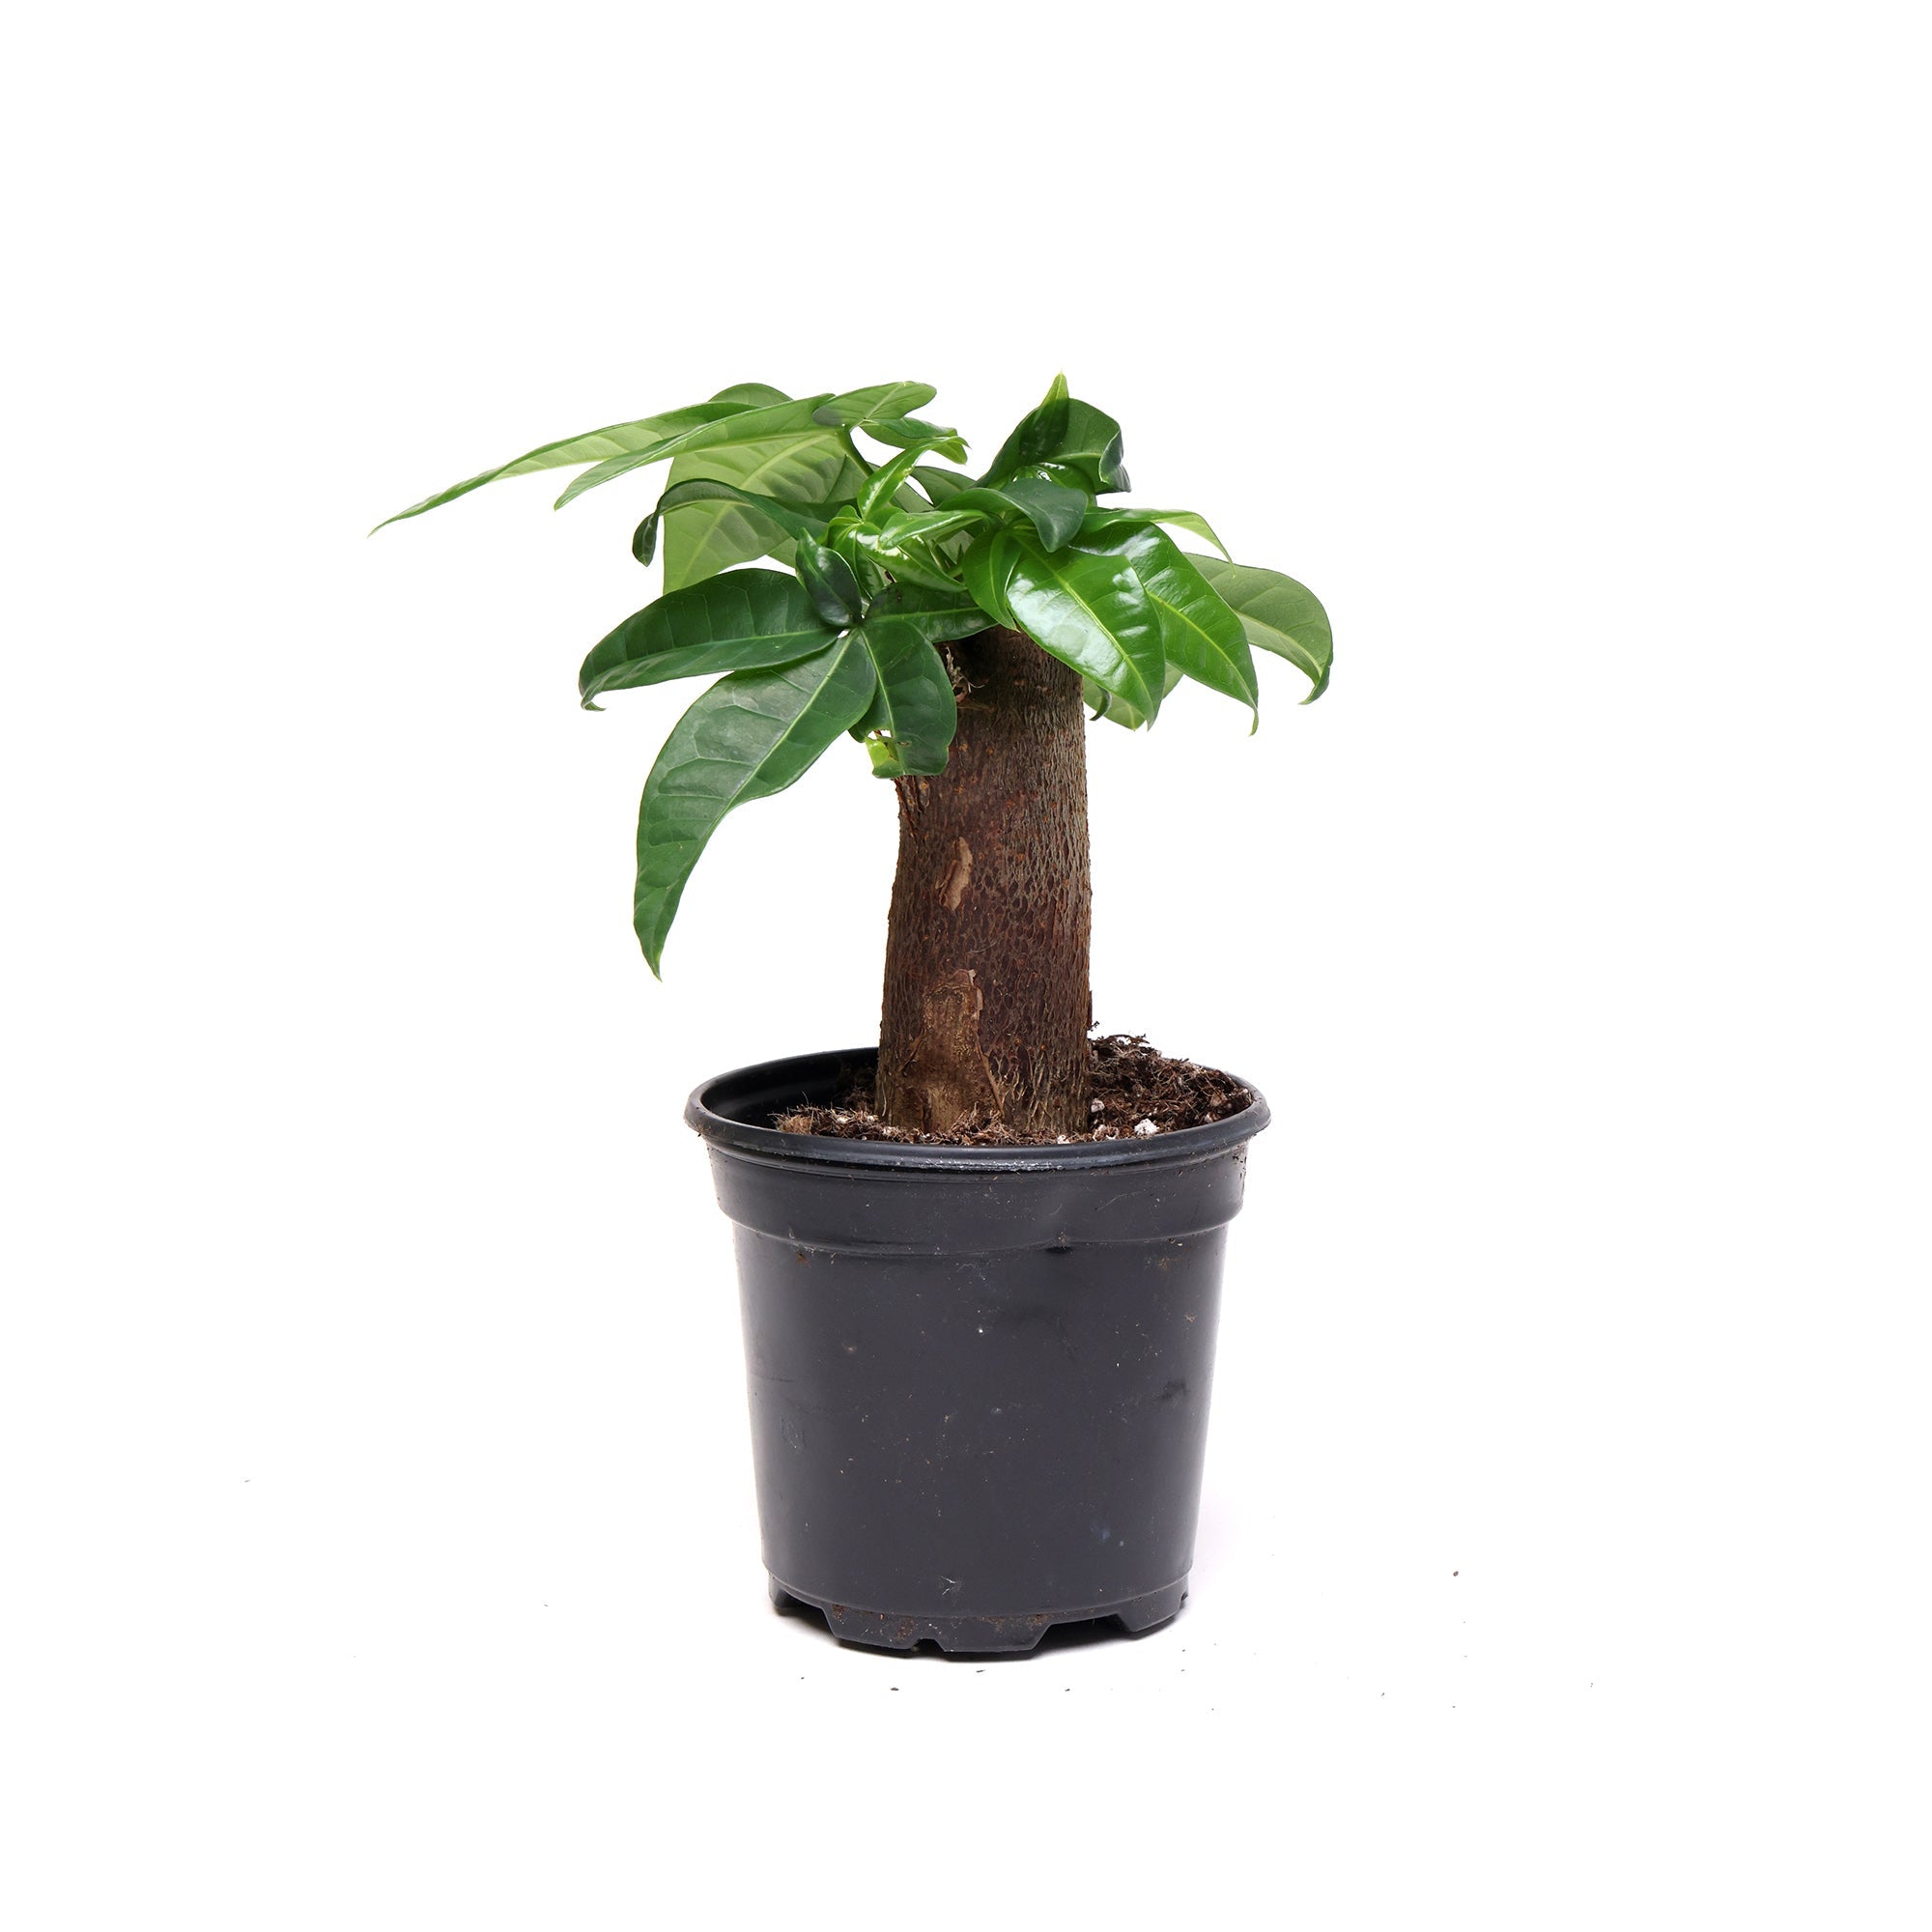 A Chive Studio 2024 Money Tree Stump 4 Inch Pot with a thick brown trunk and several green, glossy leaves. The plant is situated in a black plastic pot and is isolated on a white background, making it a perfect addition to indoor gardens as a low-maintenance plant.